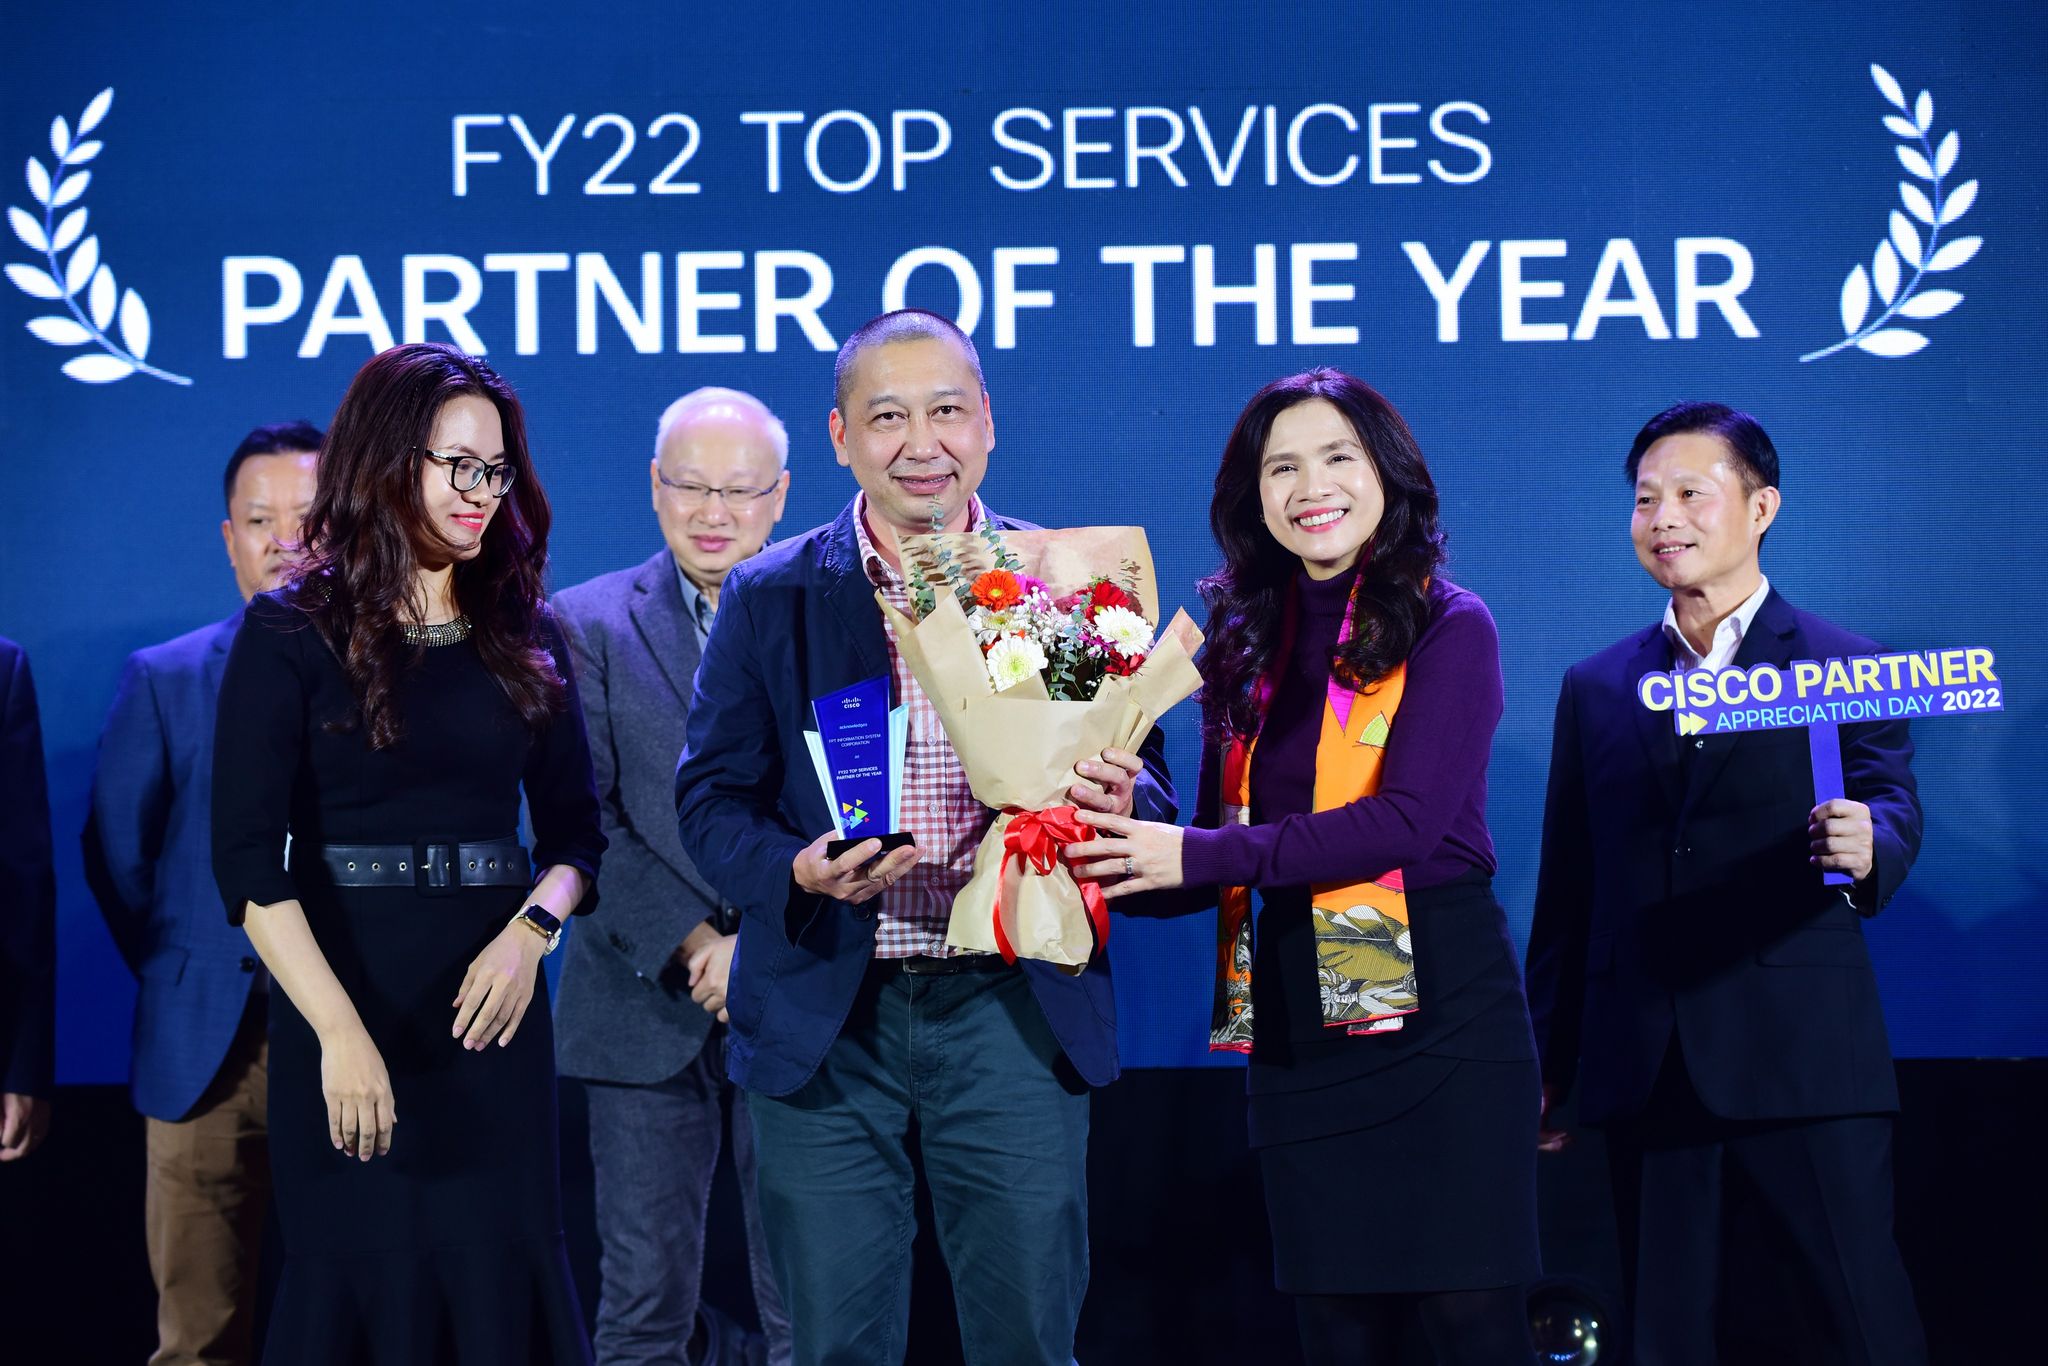 Cisco FY22 Top Services Partner of The Year